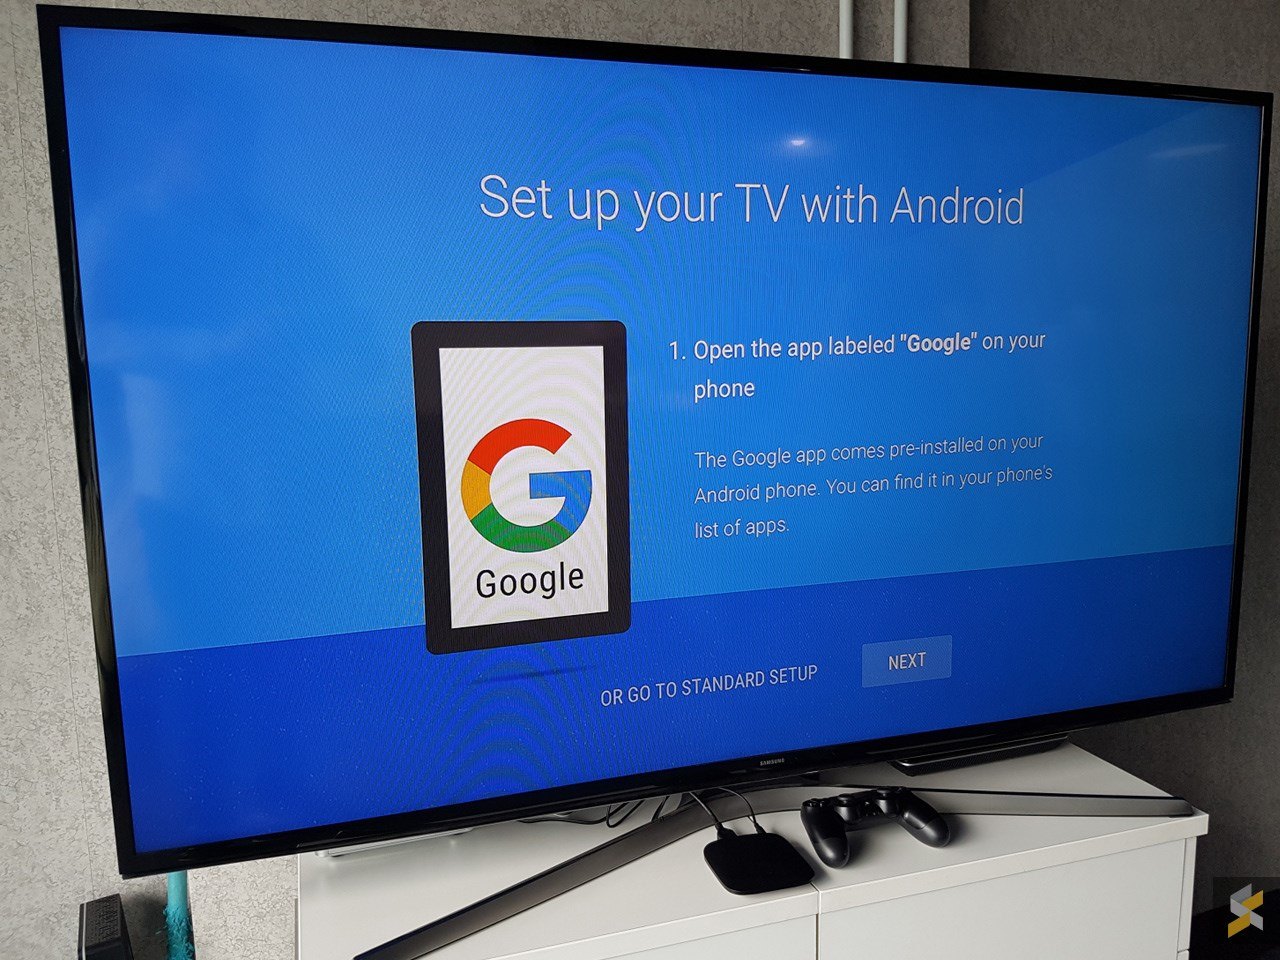 Are android boxes illegal in Malaysia? Here's what